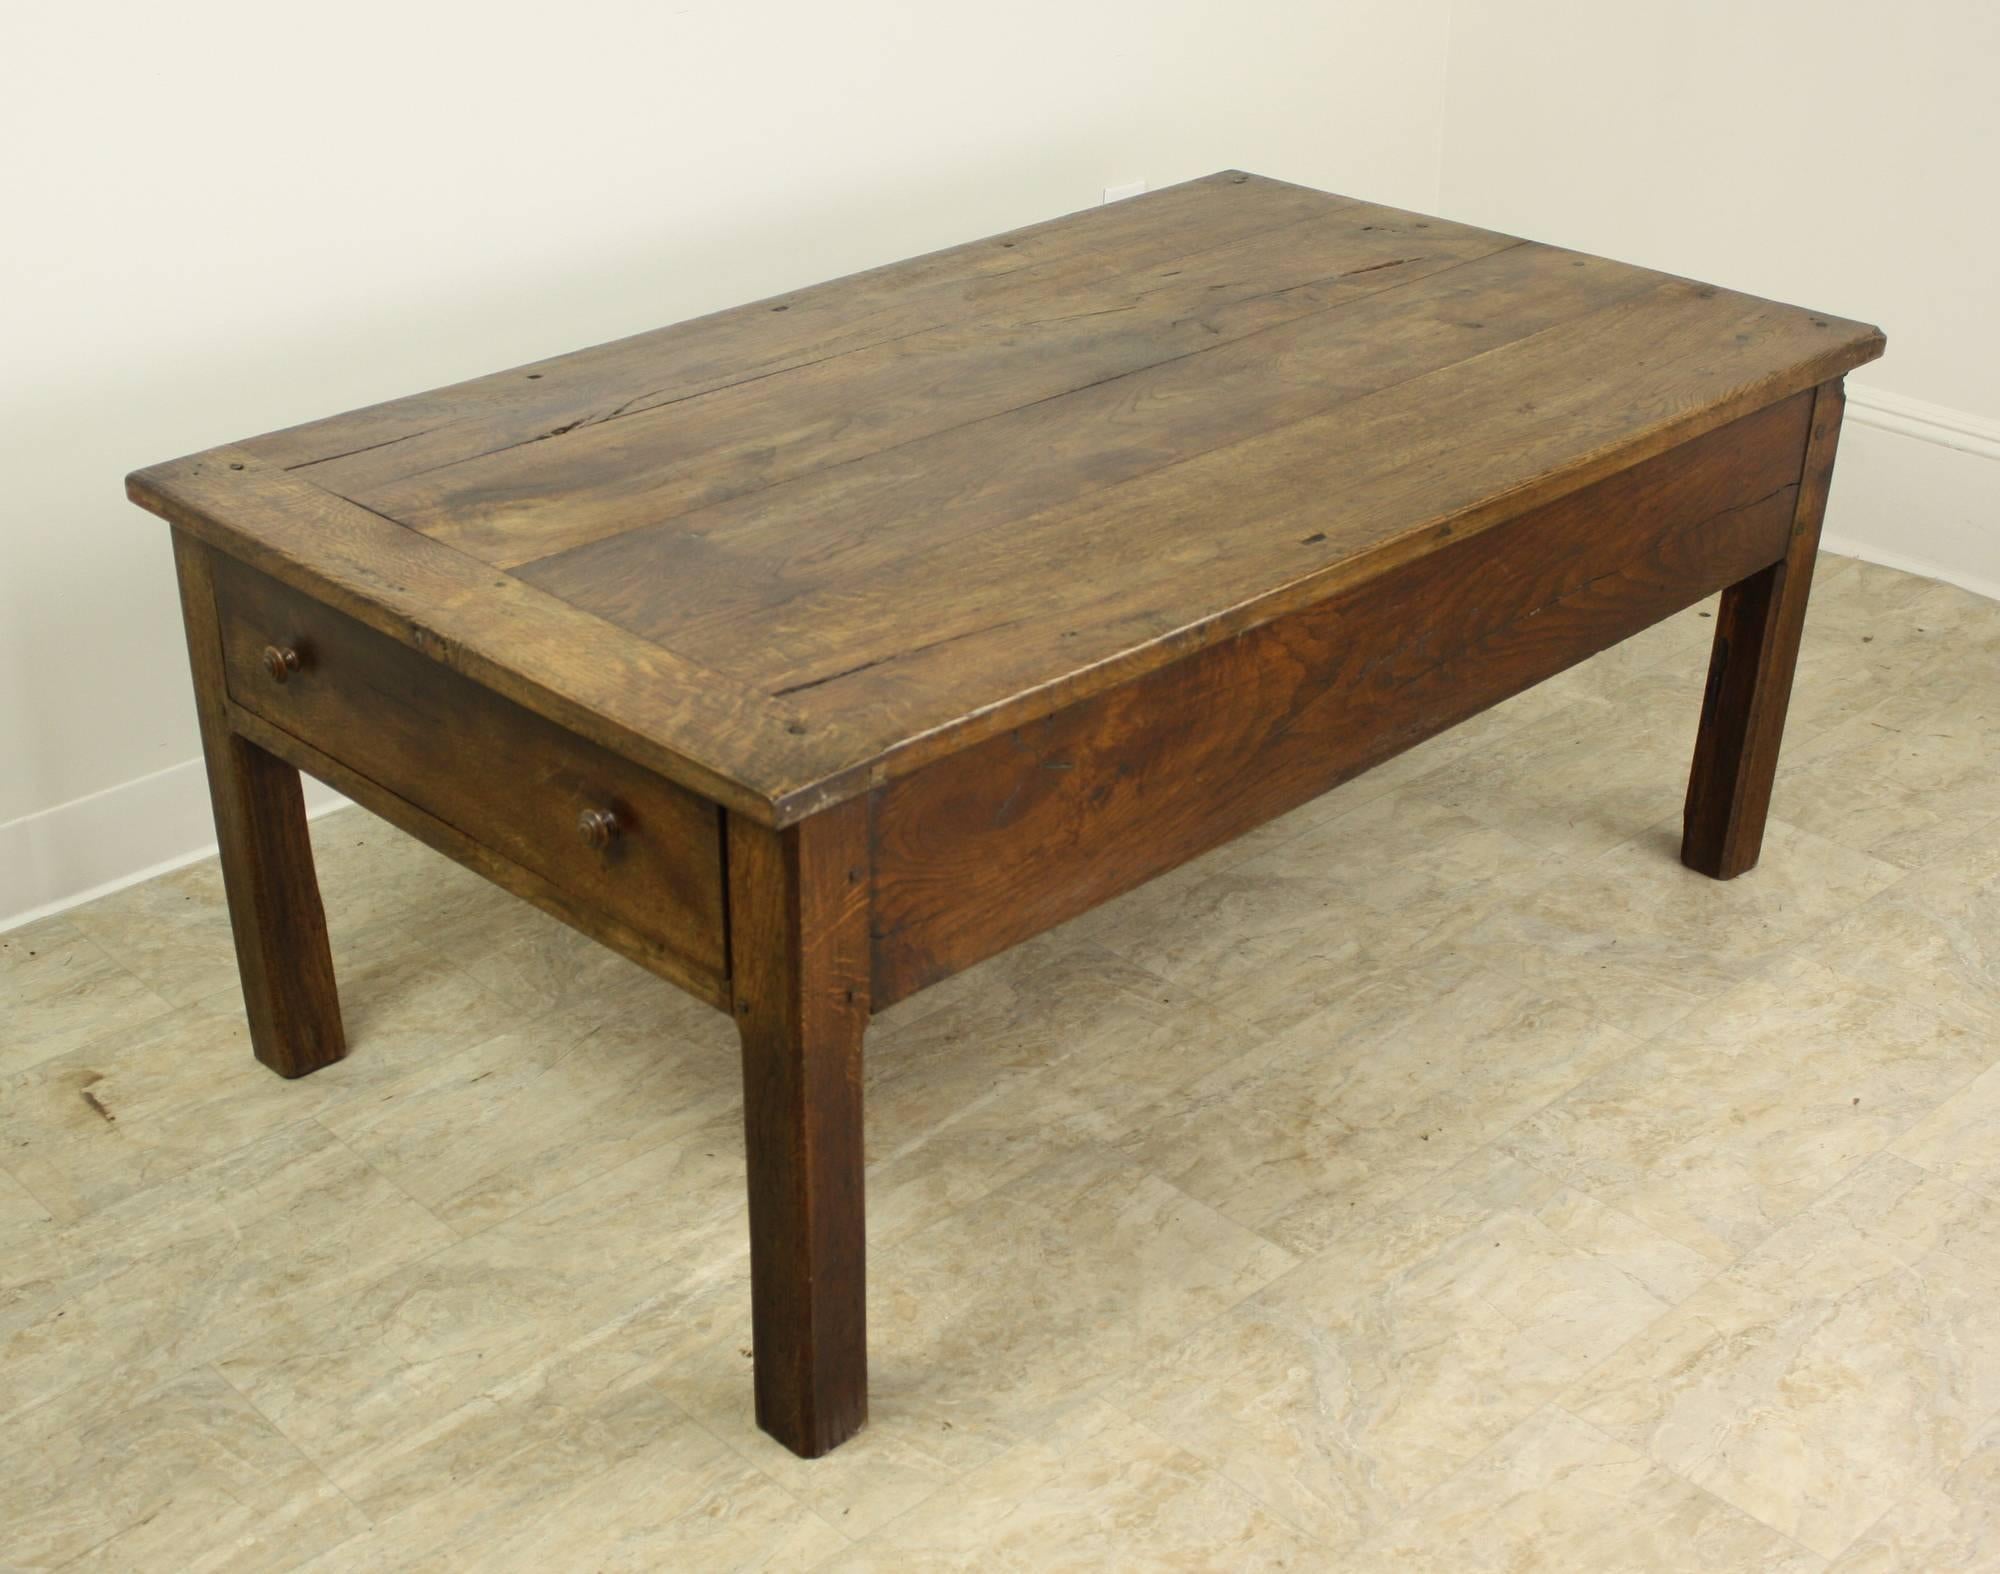 A handsome silhouette in well patinated early oak. This coffee table boasts two  drawers, one on each end, nice grain and a rich warm color. The top has some areas of light distress, which lends the piece good character. The strong legs add another